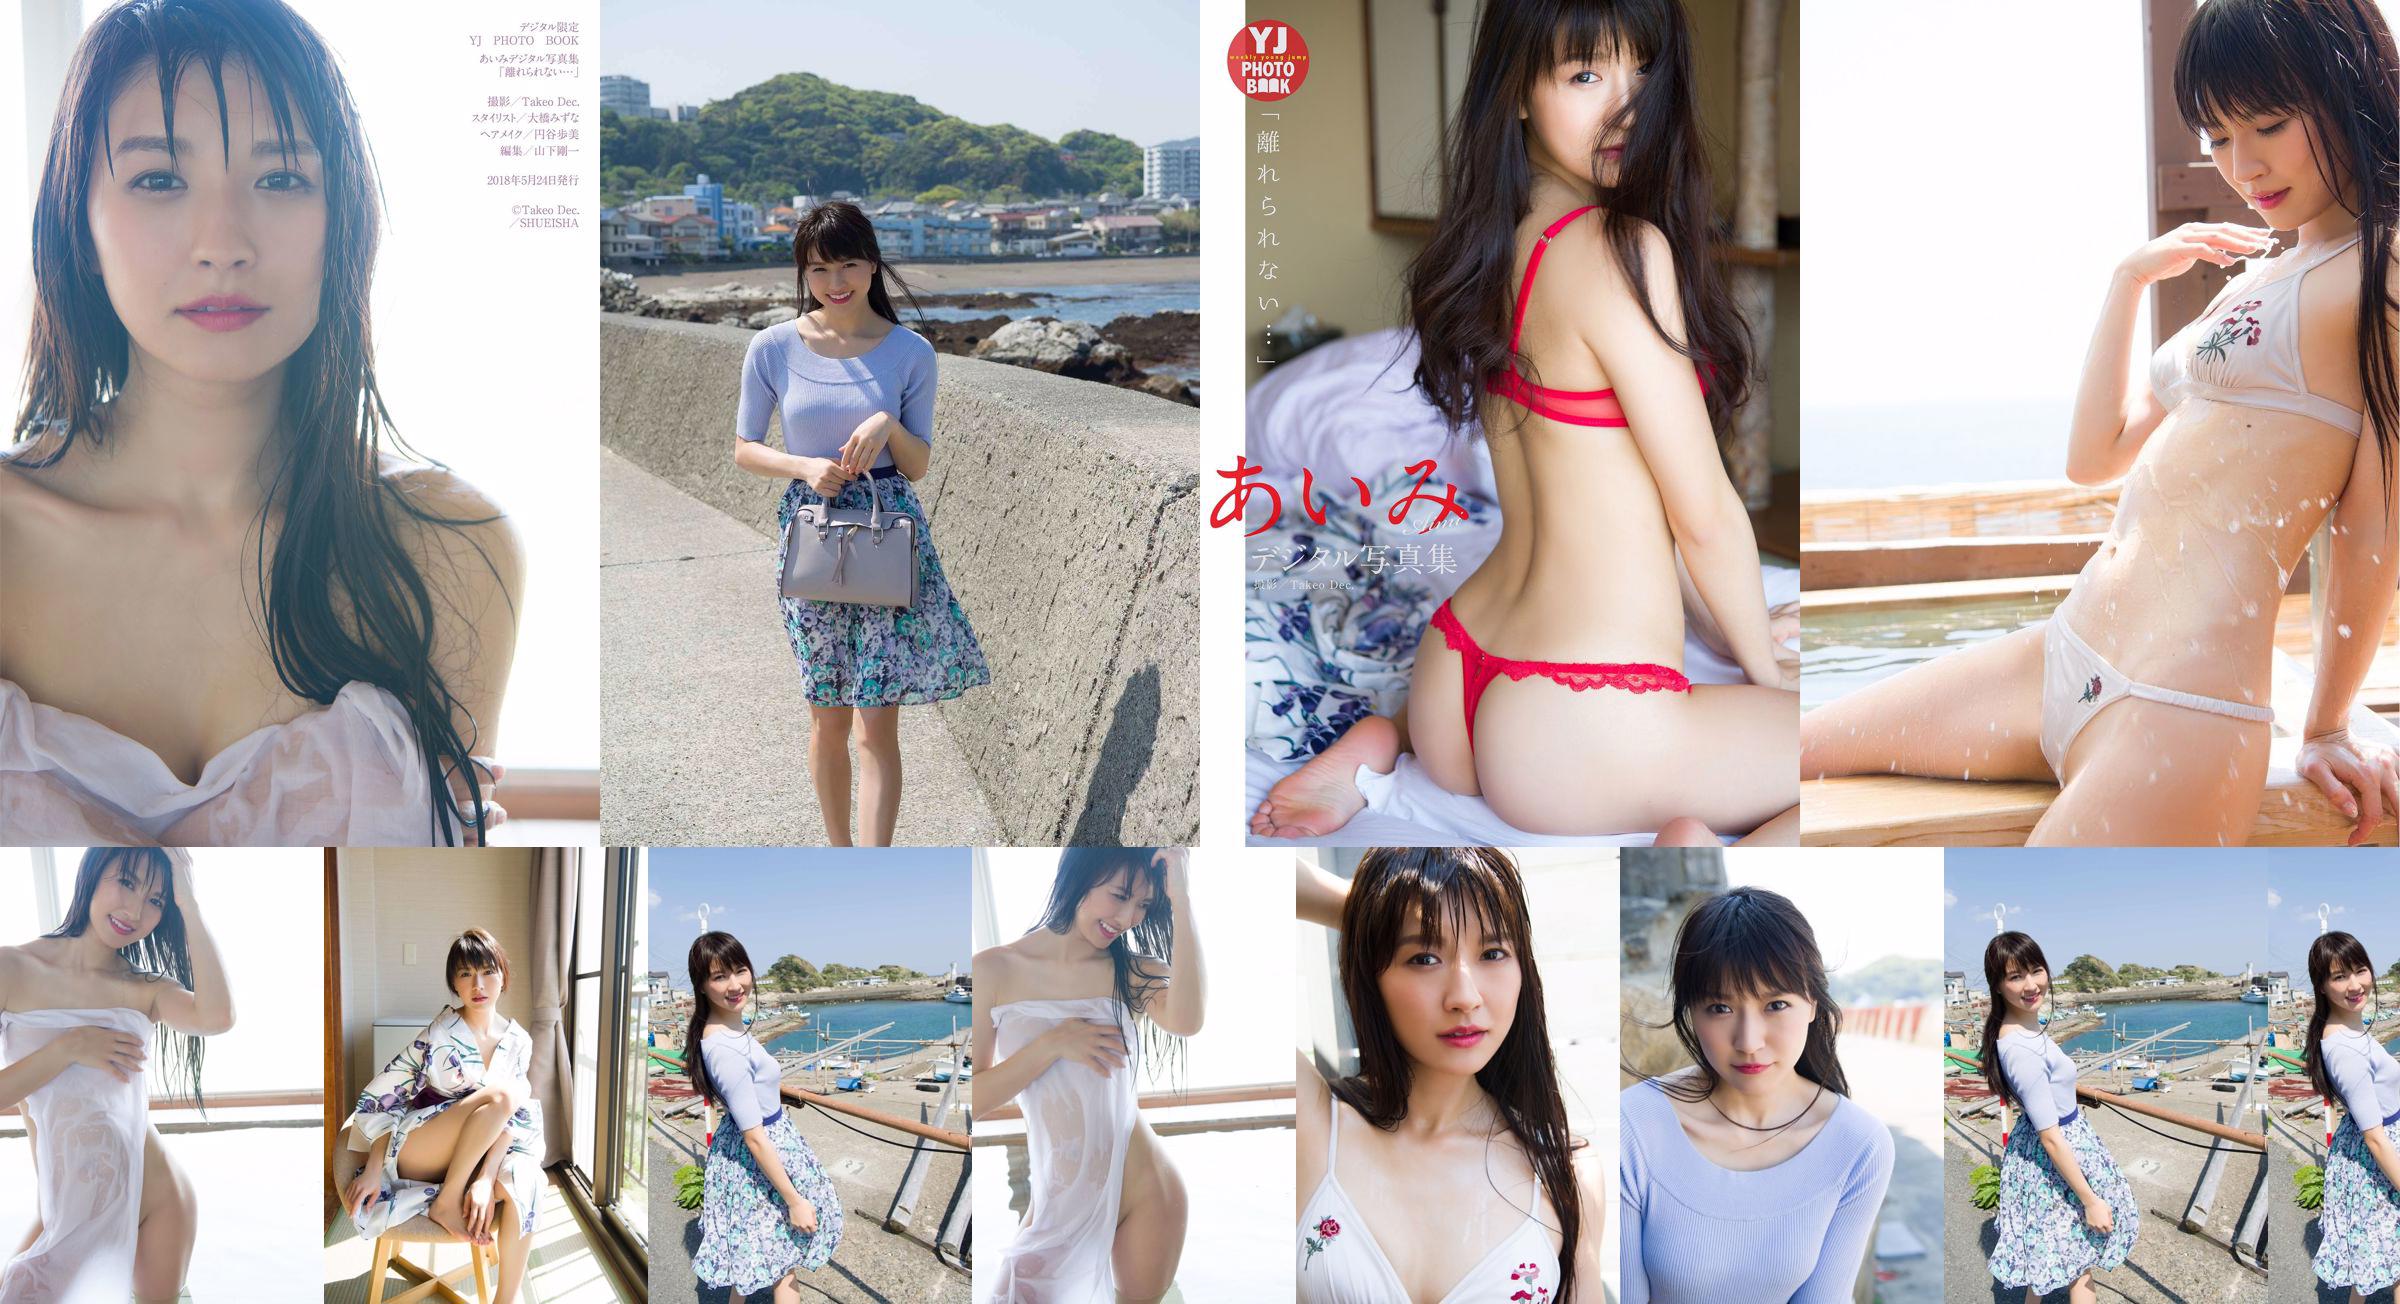 Aimi Nakano "I can't leave ..." [Digital Limited YJ PHOTO BOOK] No.694896 Page 15